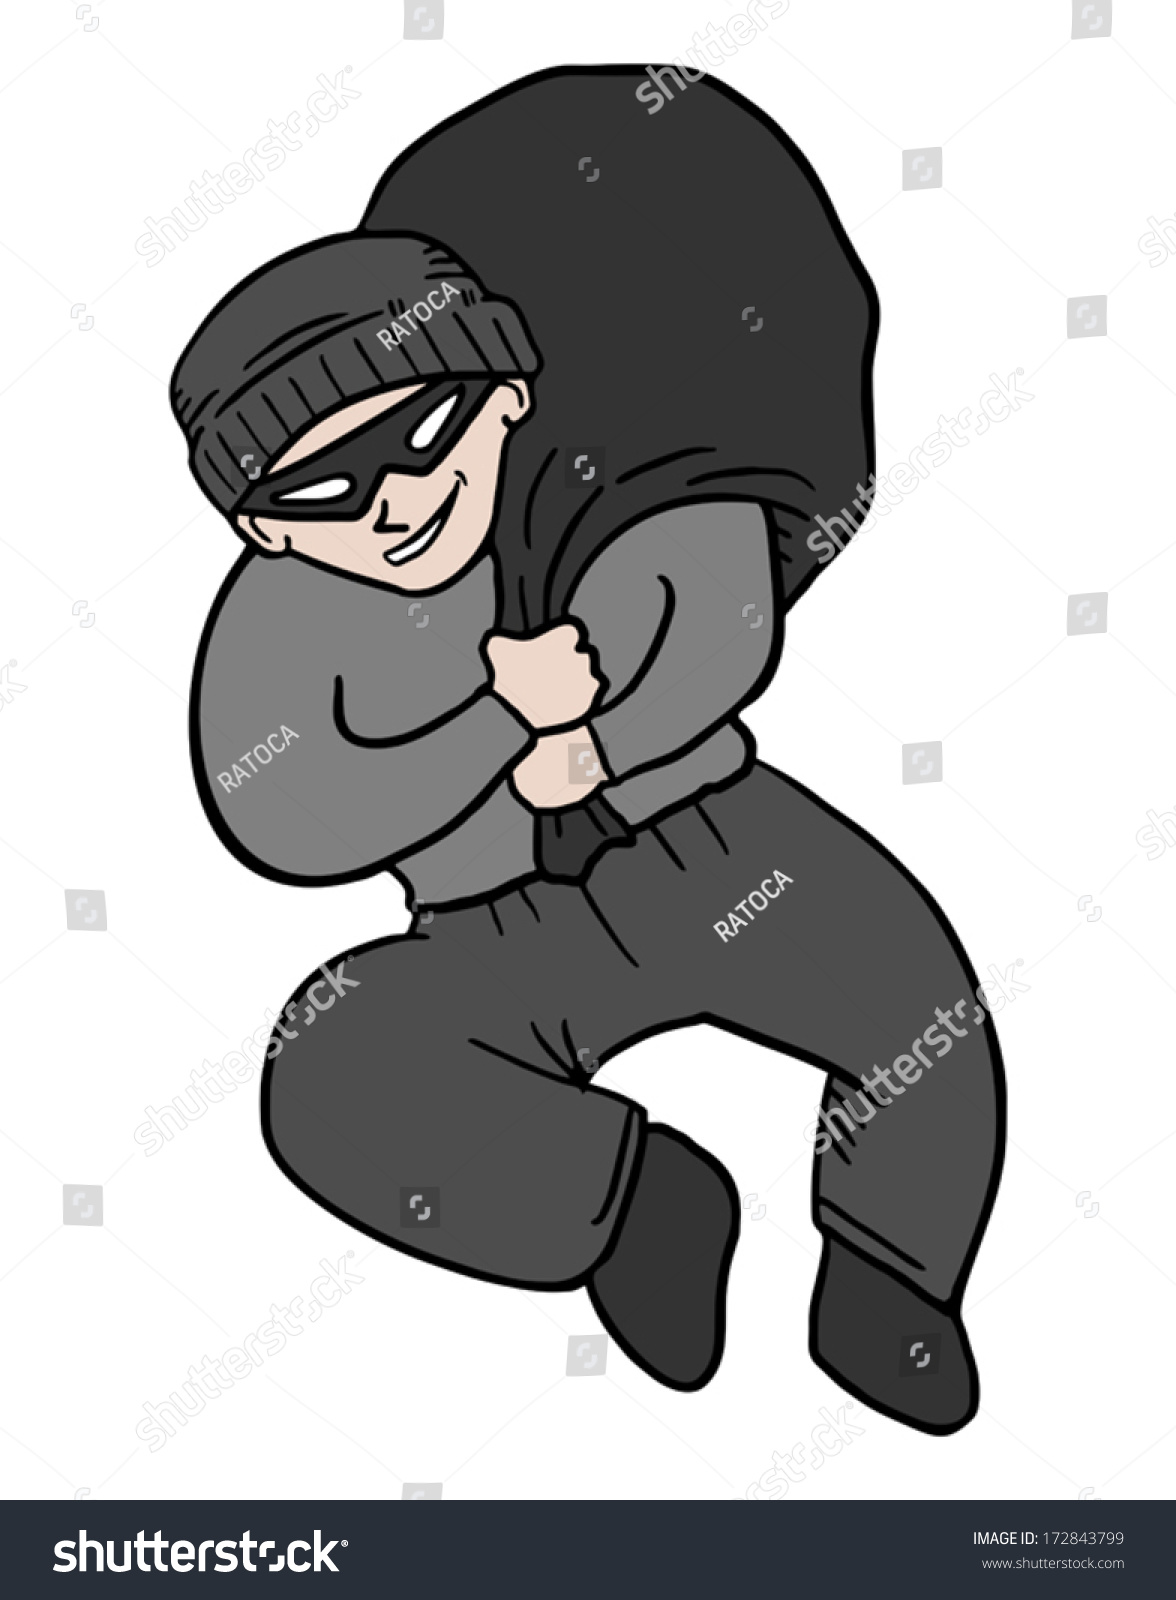 Thief Draw Stock Vector (Royalty Free) 172843799